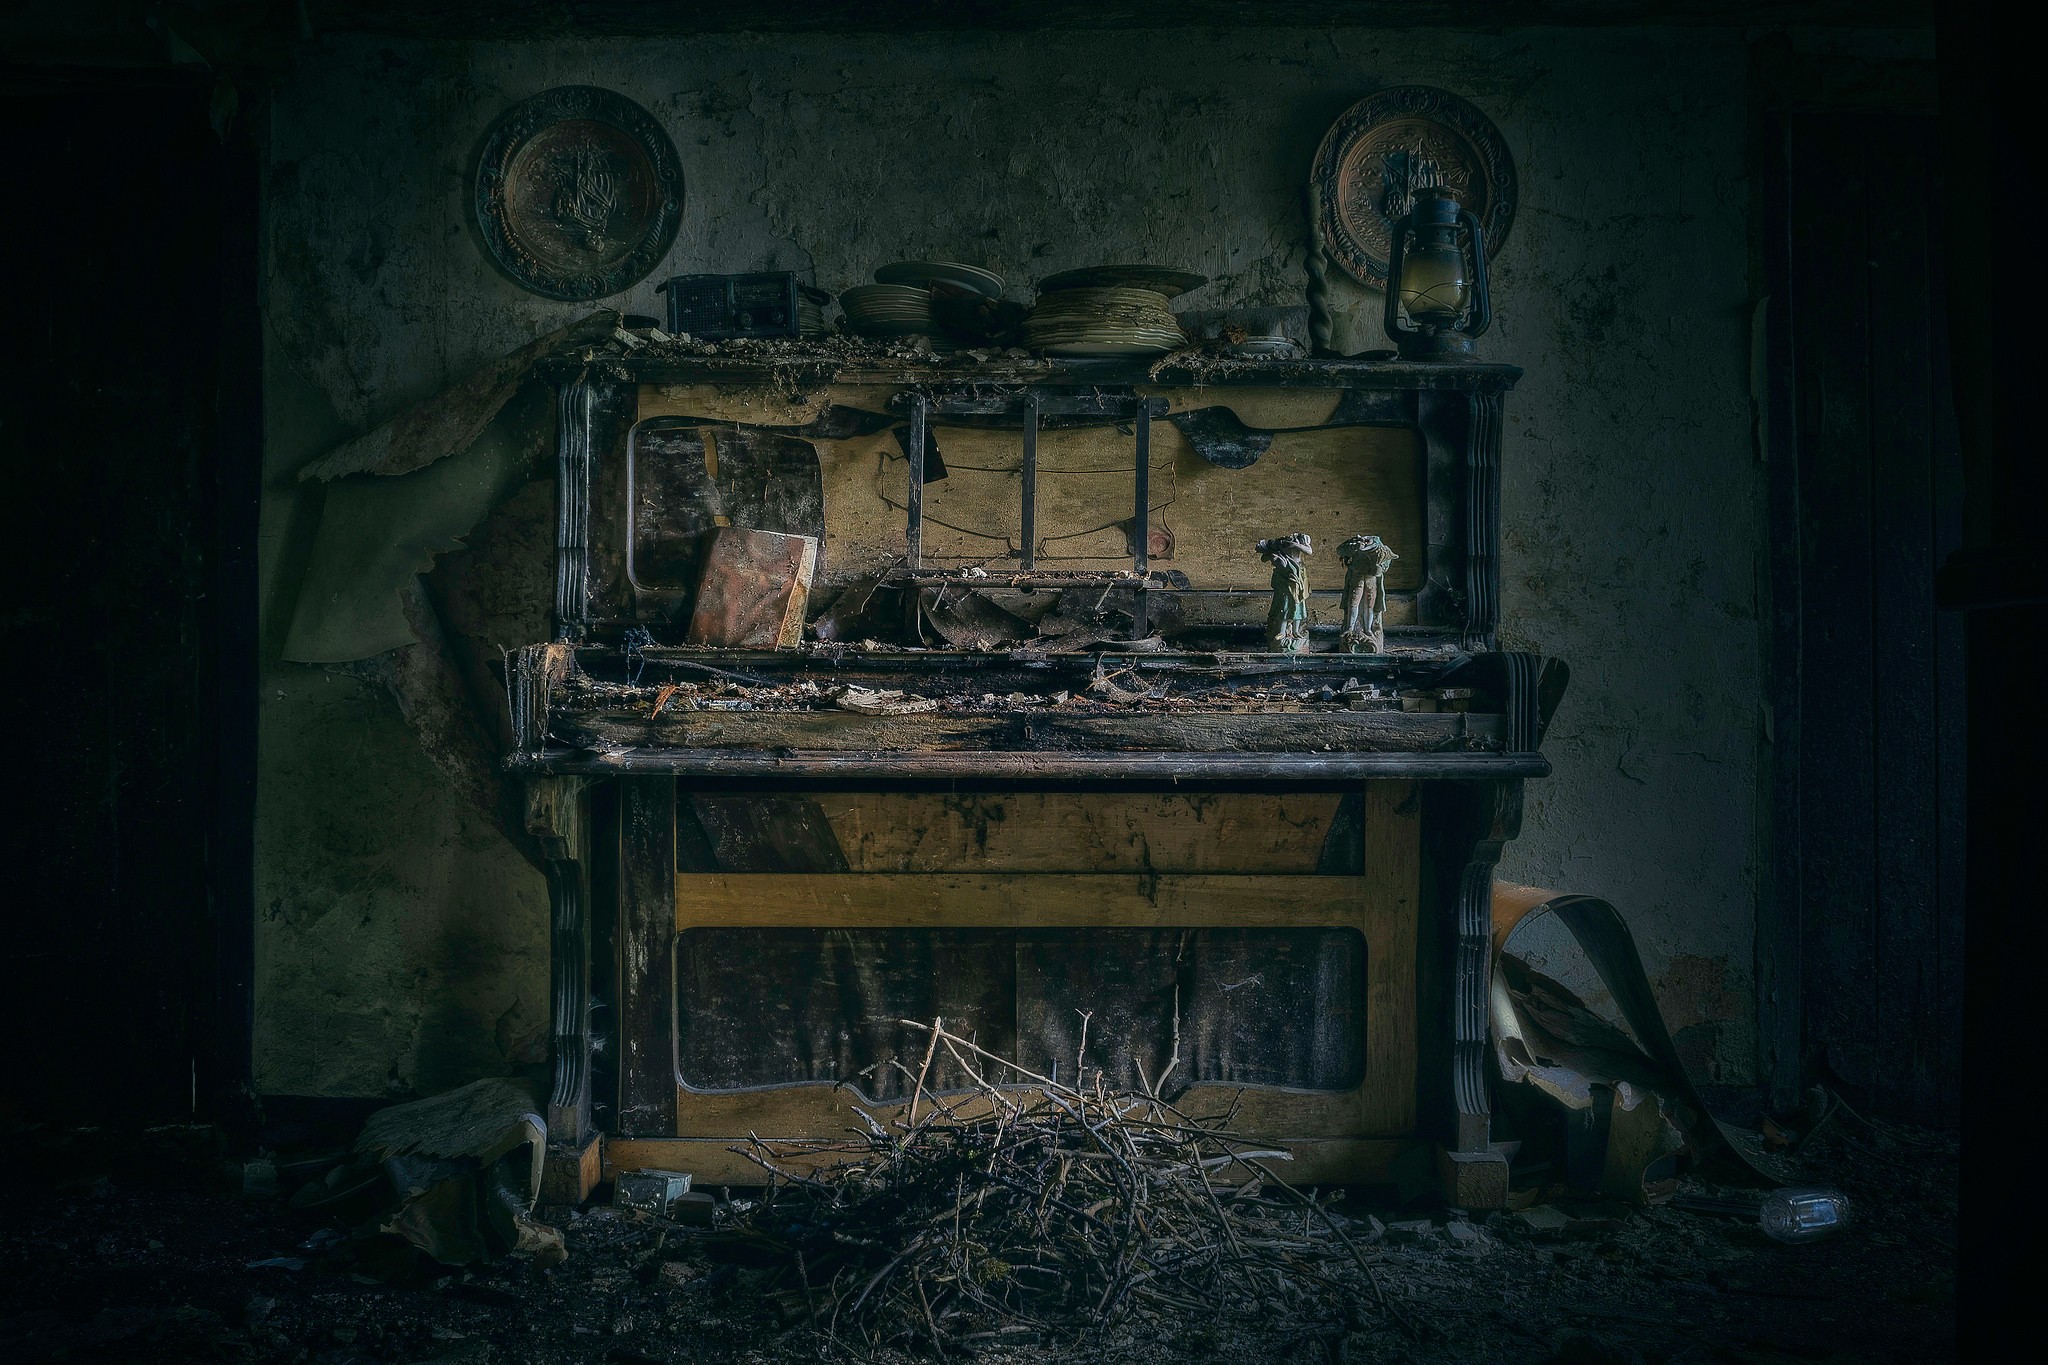 General 2048x1365 piano ruins old musical instrument abandoned indoors